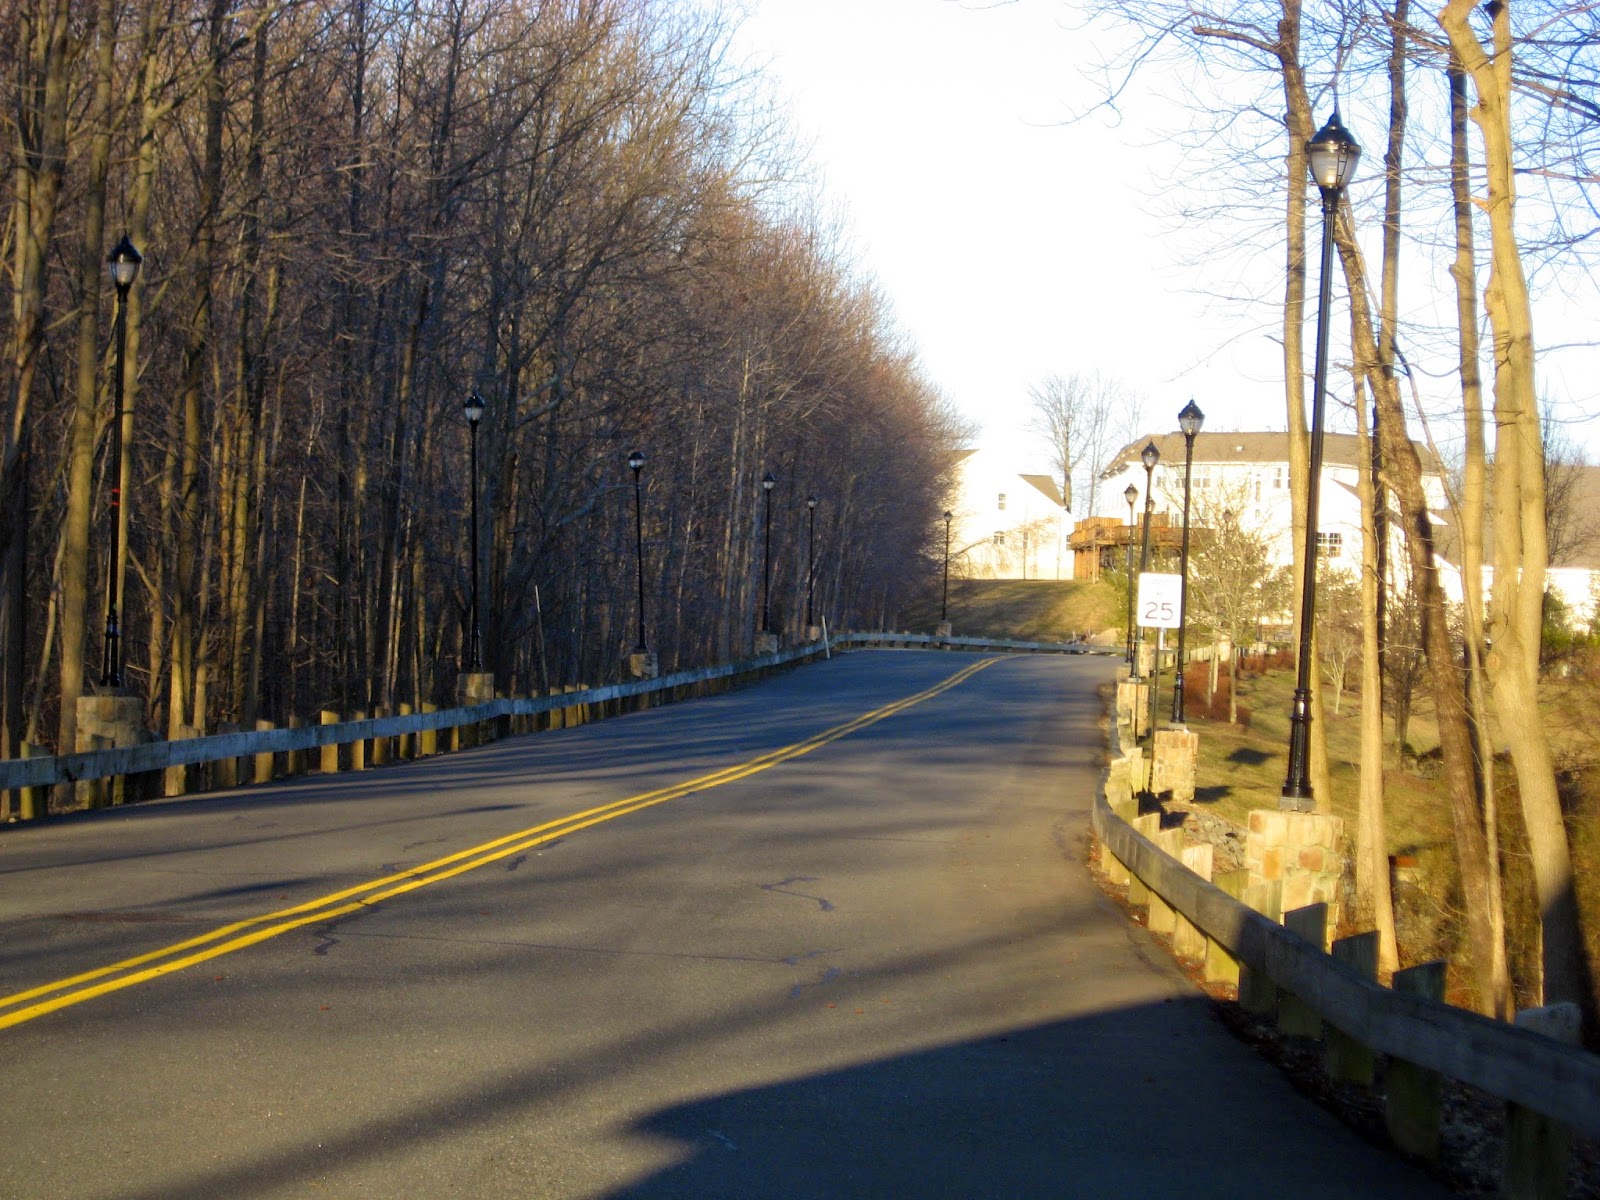 What used to be The Birch Hill Nightclub entrance roadway from Route 9 south Old Bridge, NJ  March 2015